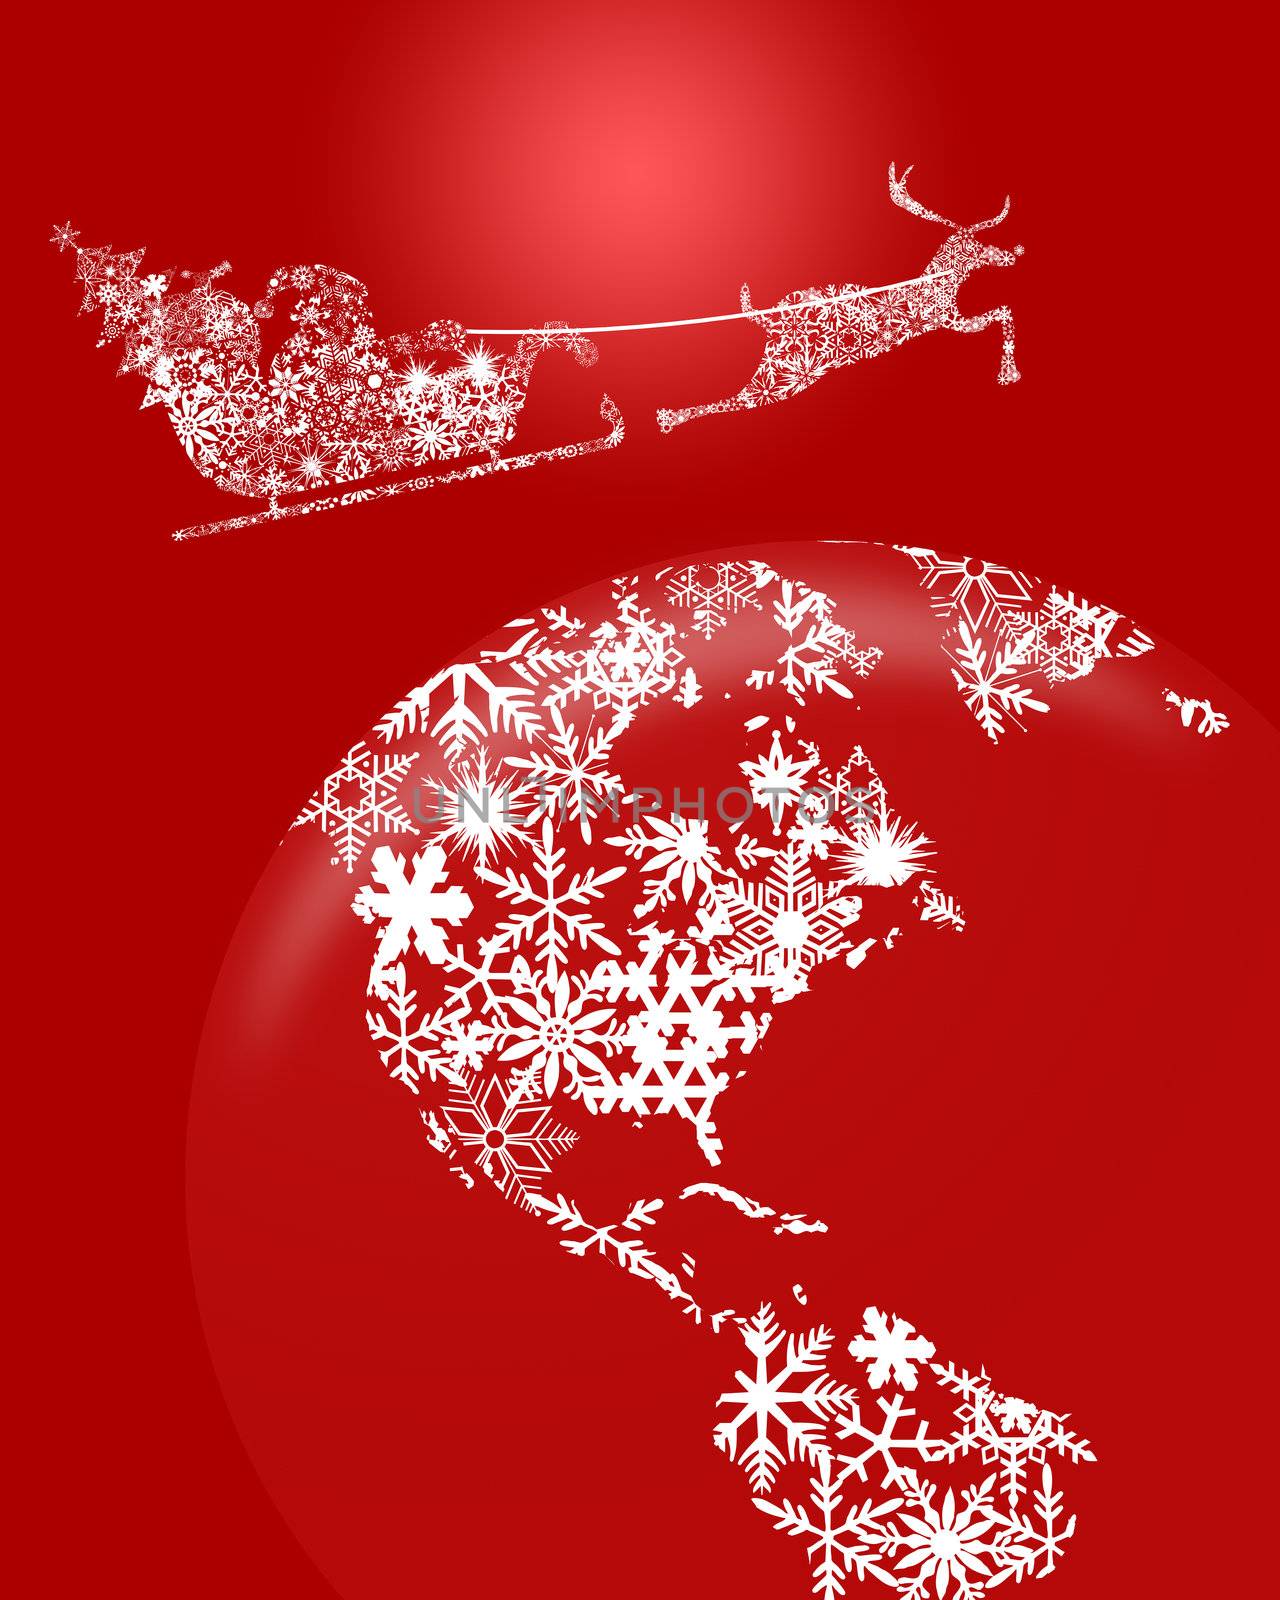 Christmas in Sleigh with Reindeer over Earth Globe Clipart Illustration on Red Background